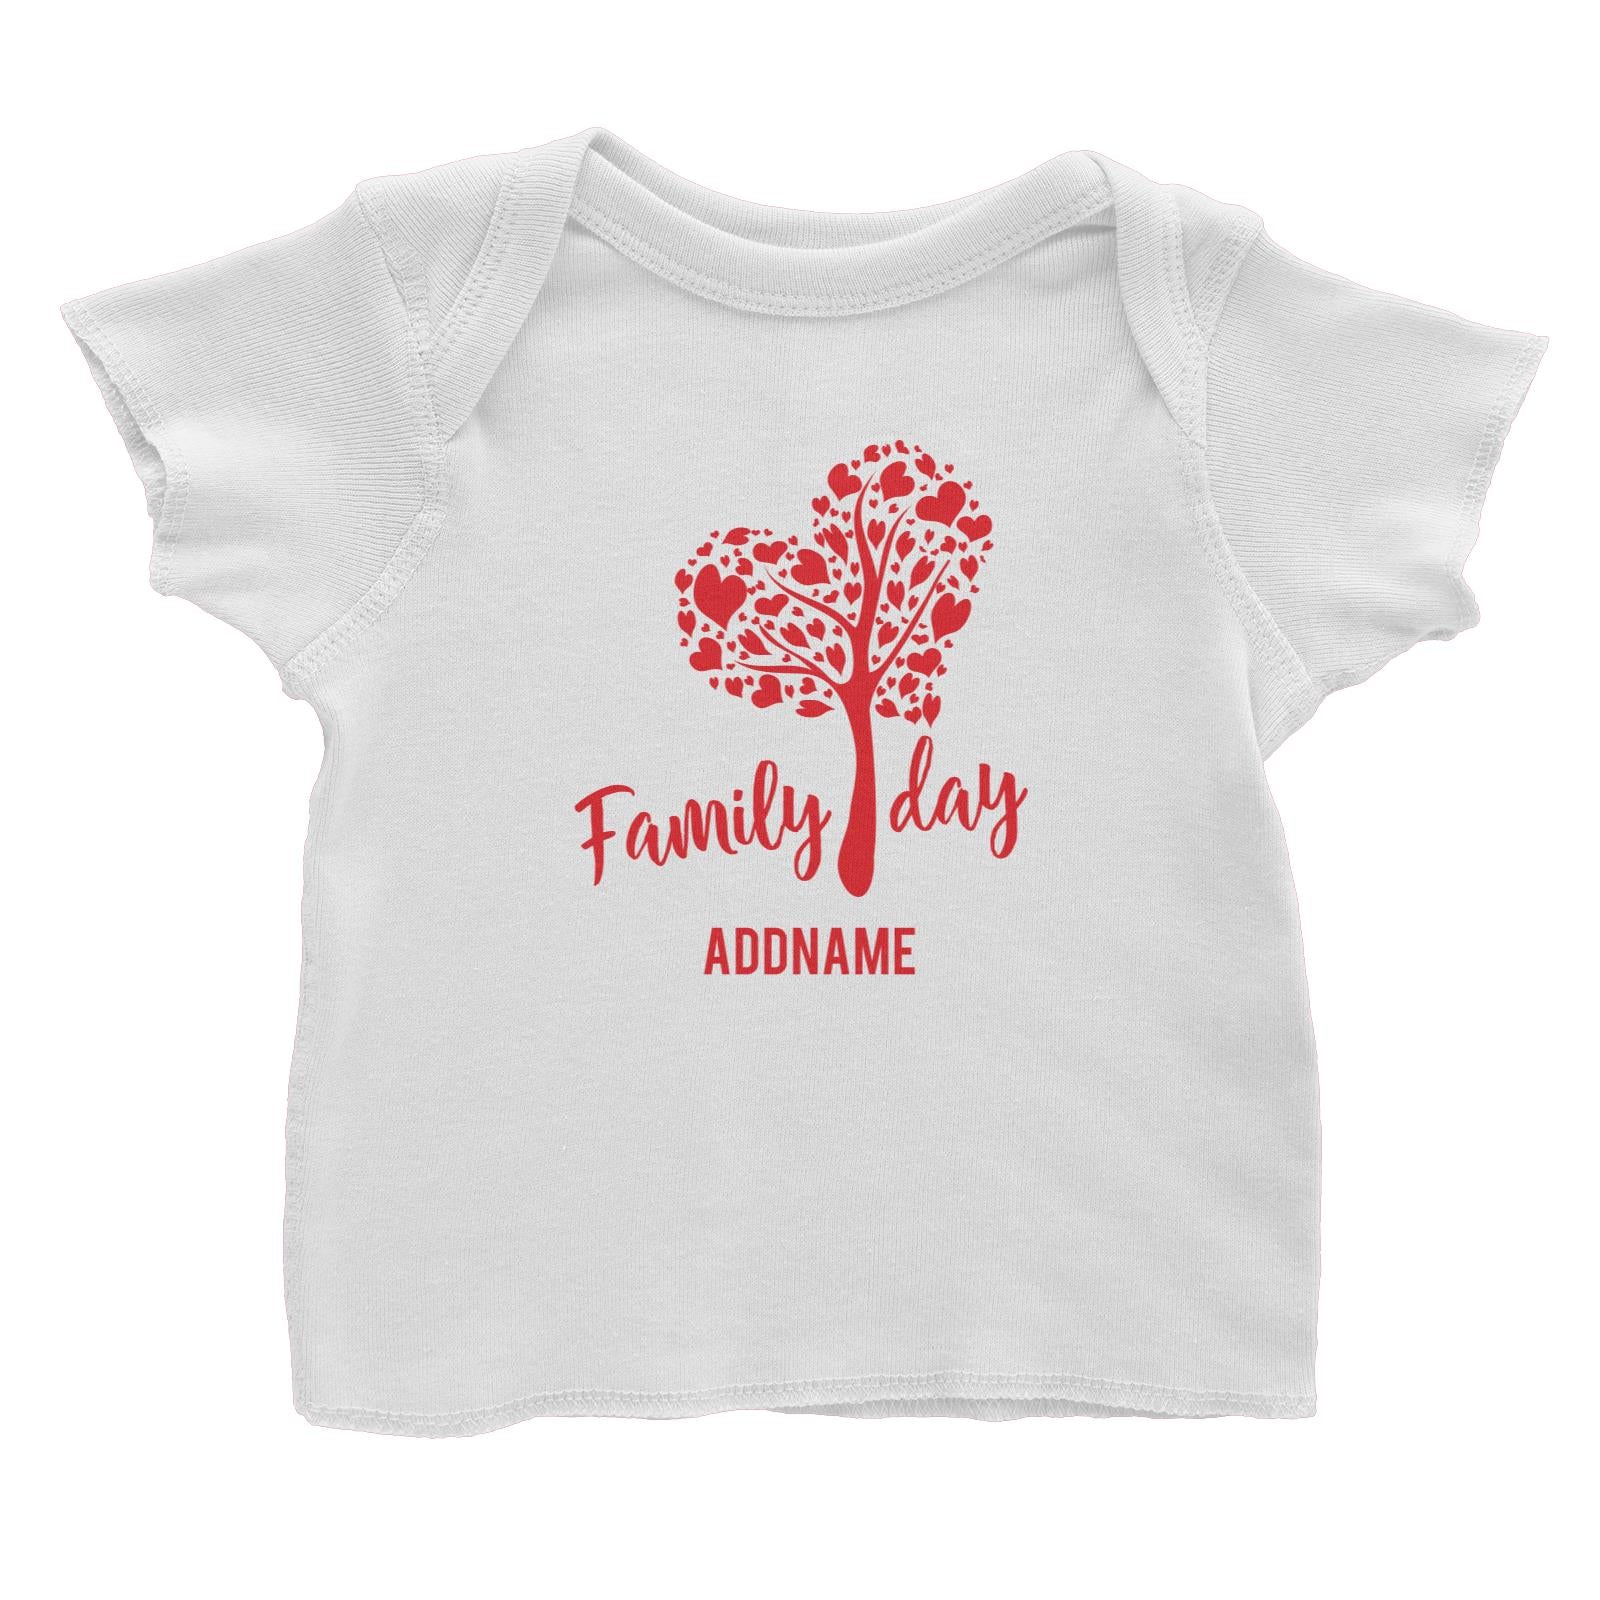 Family Day Love Tree With Love Leaves Family Day Addname Baby T-Shirt